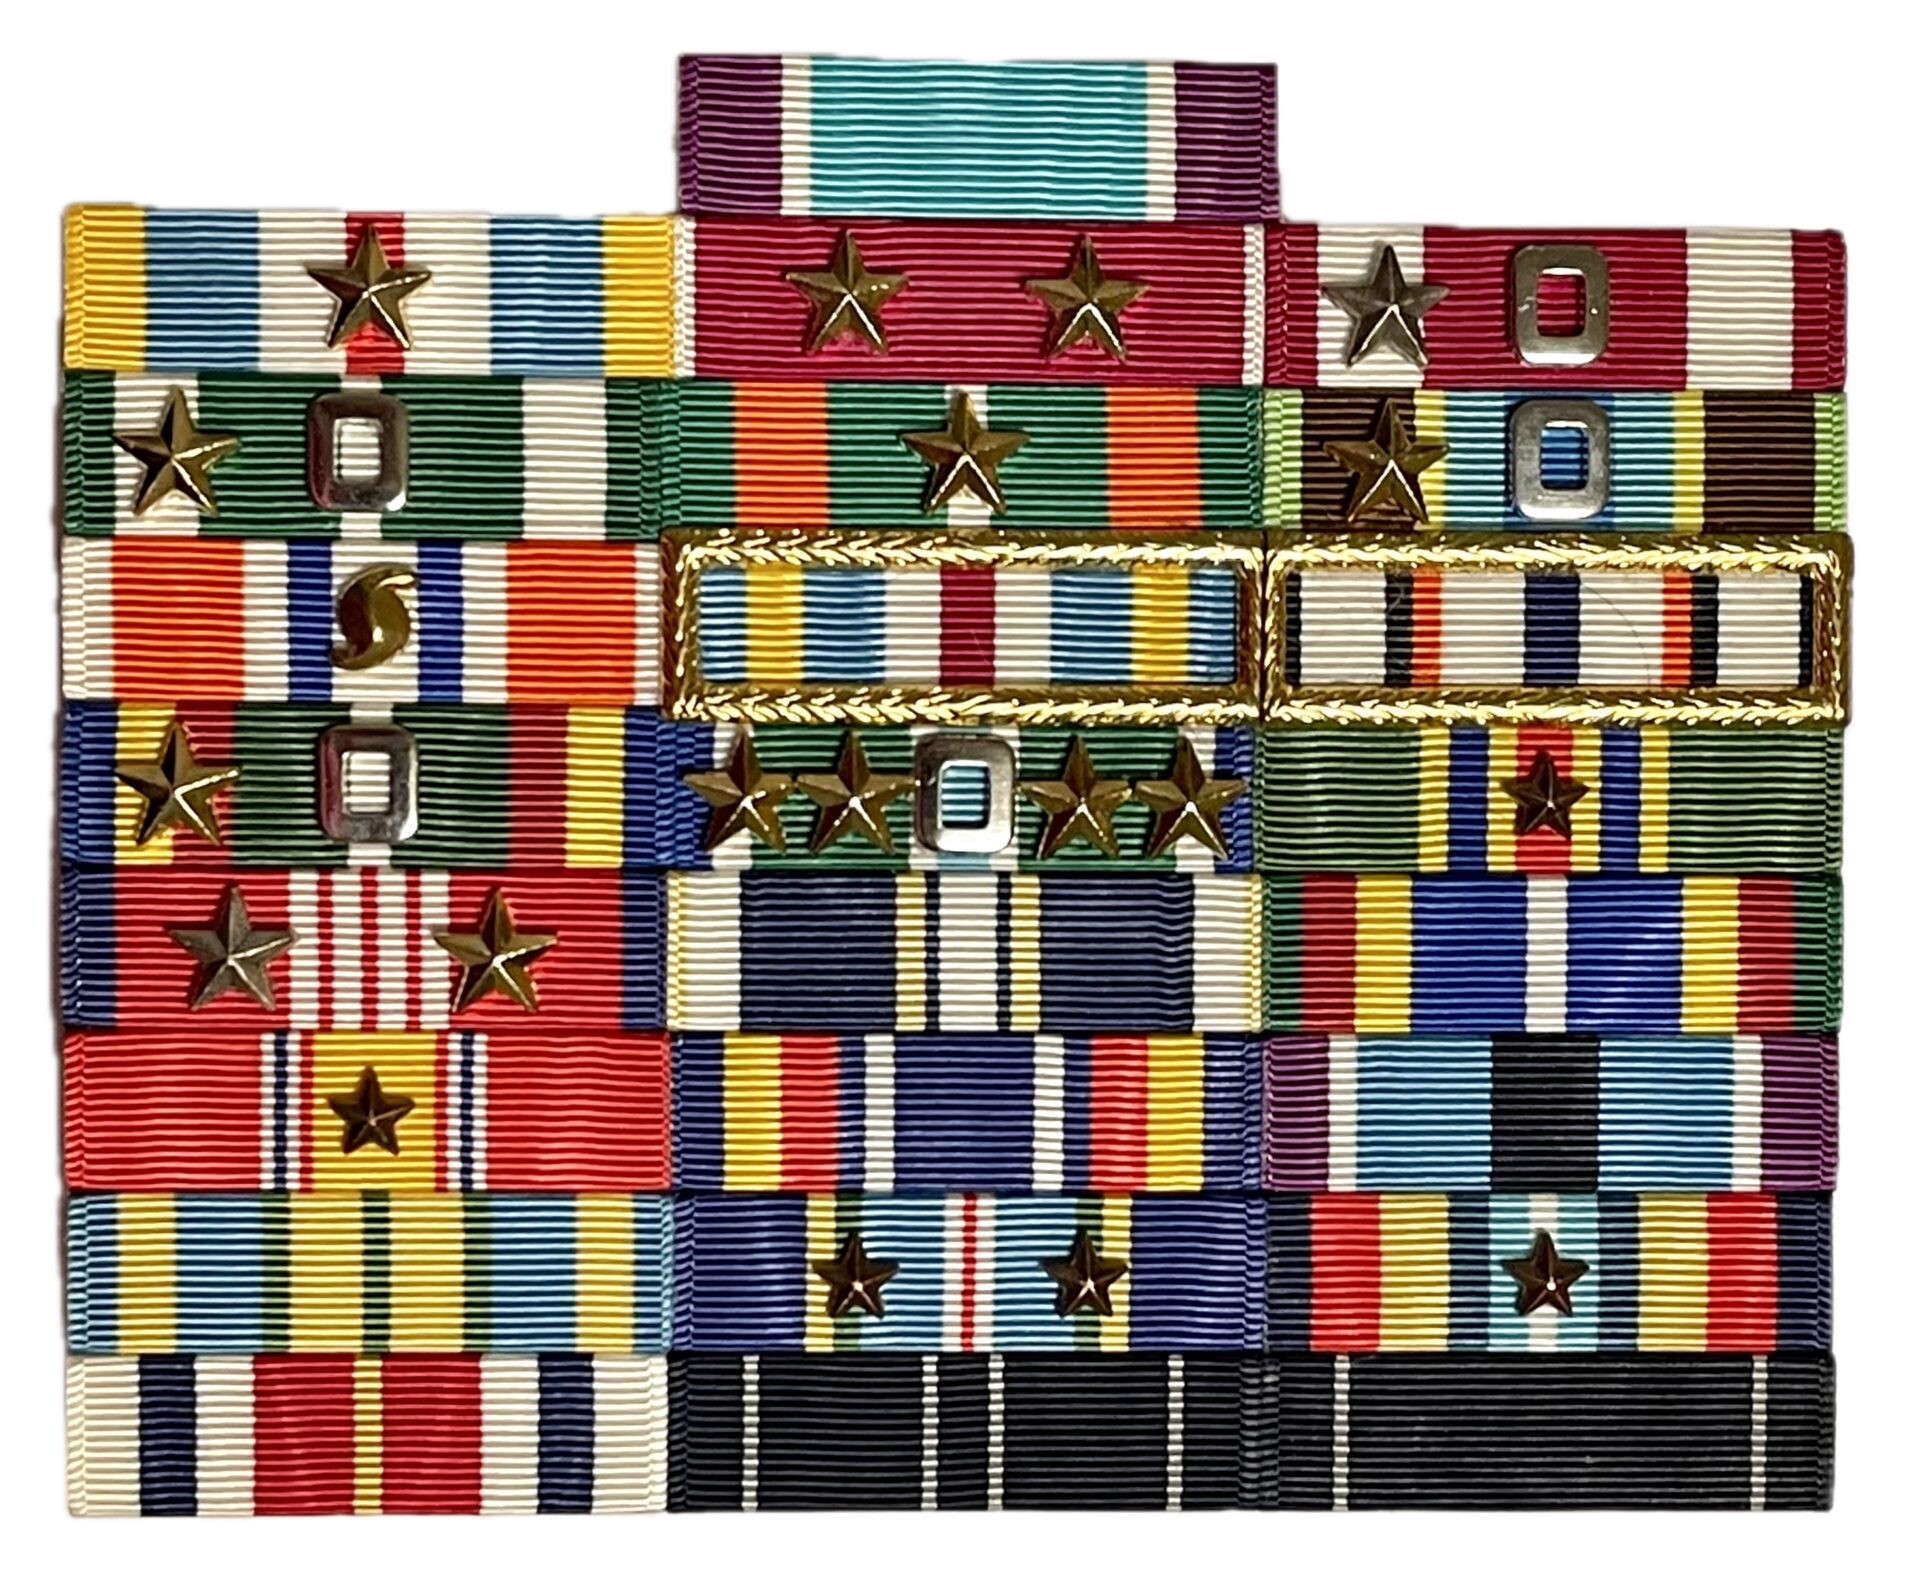 A stack of military ribbons with stars on them.